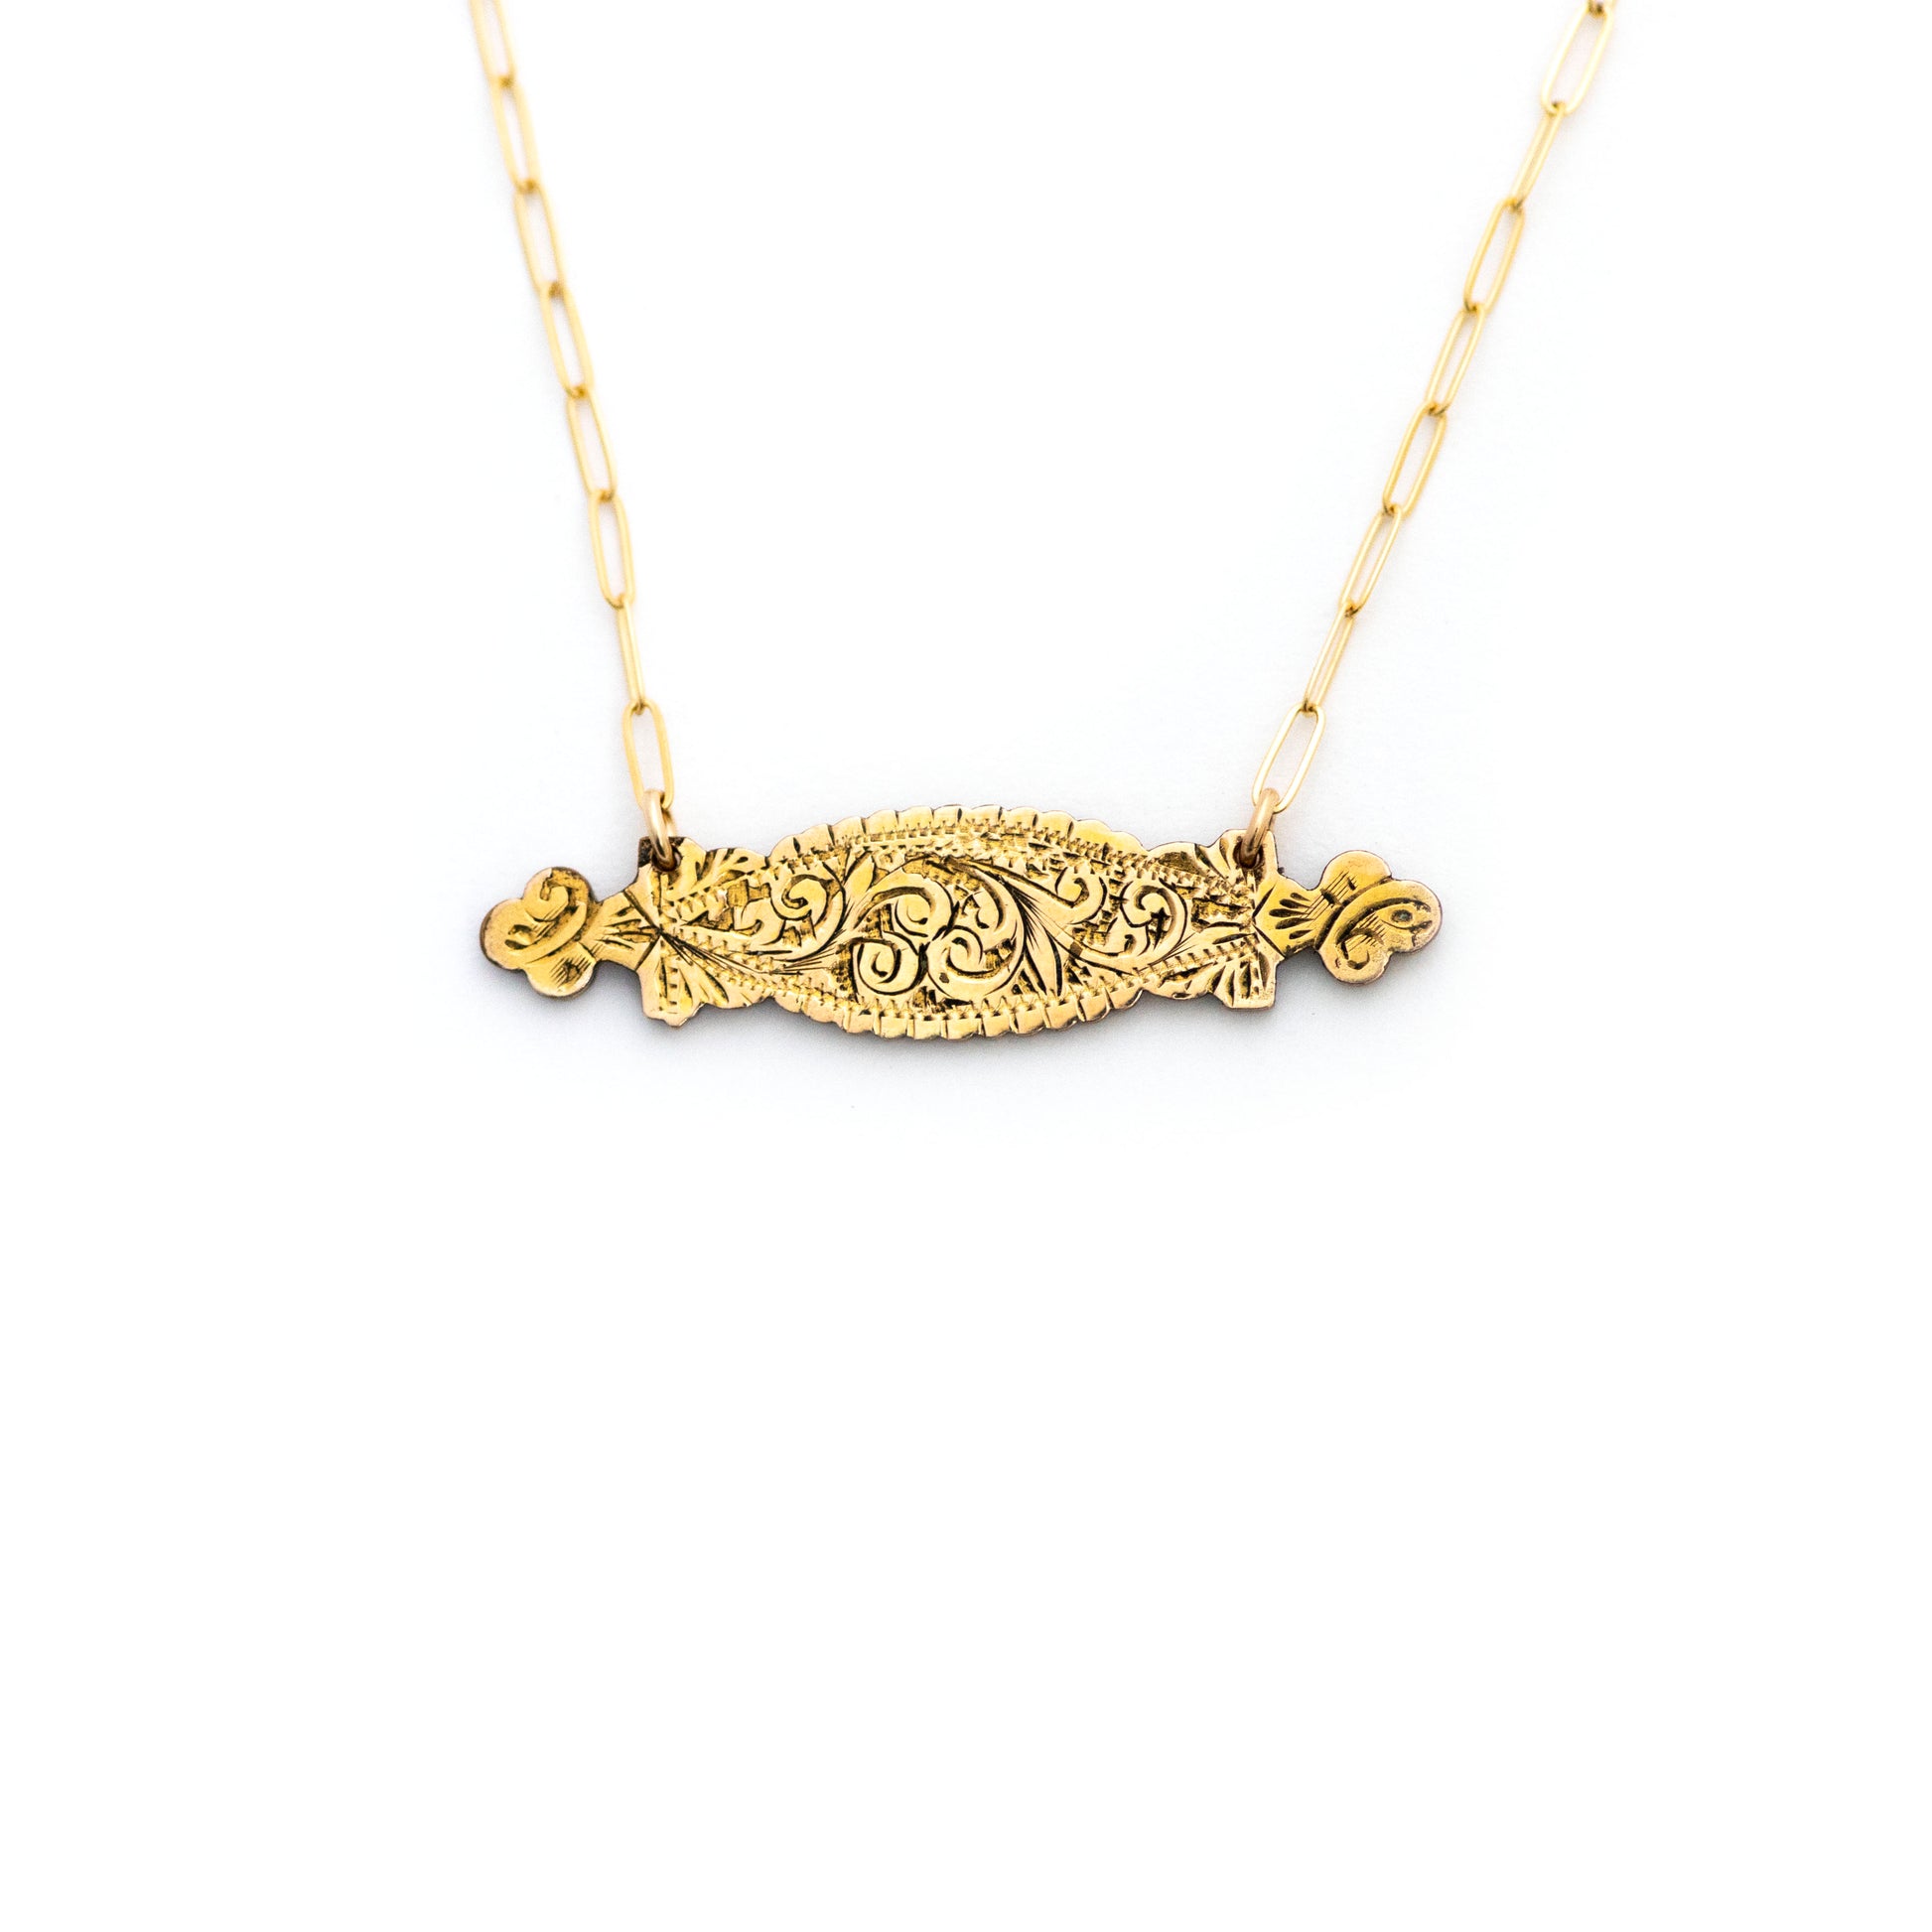 This one-of-a-kind conversion necklace is made up of:  Gold filled Victorian bar pin pendant from the late 1800s with hand engraved scrolling floral details. 